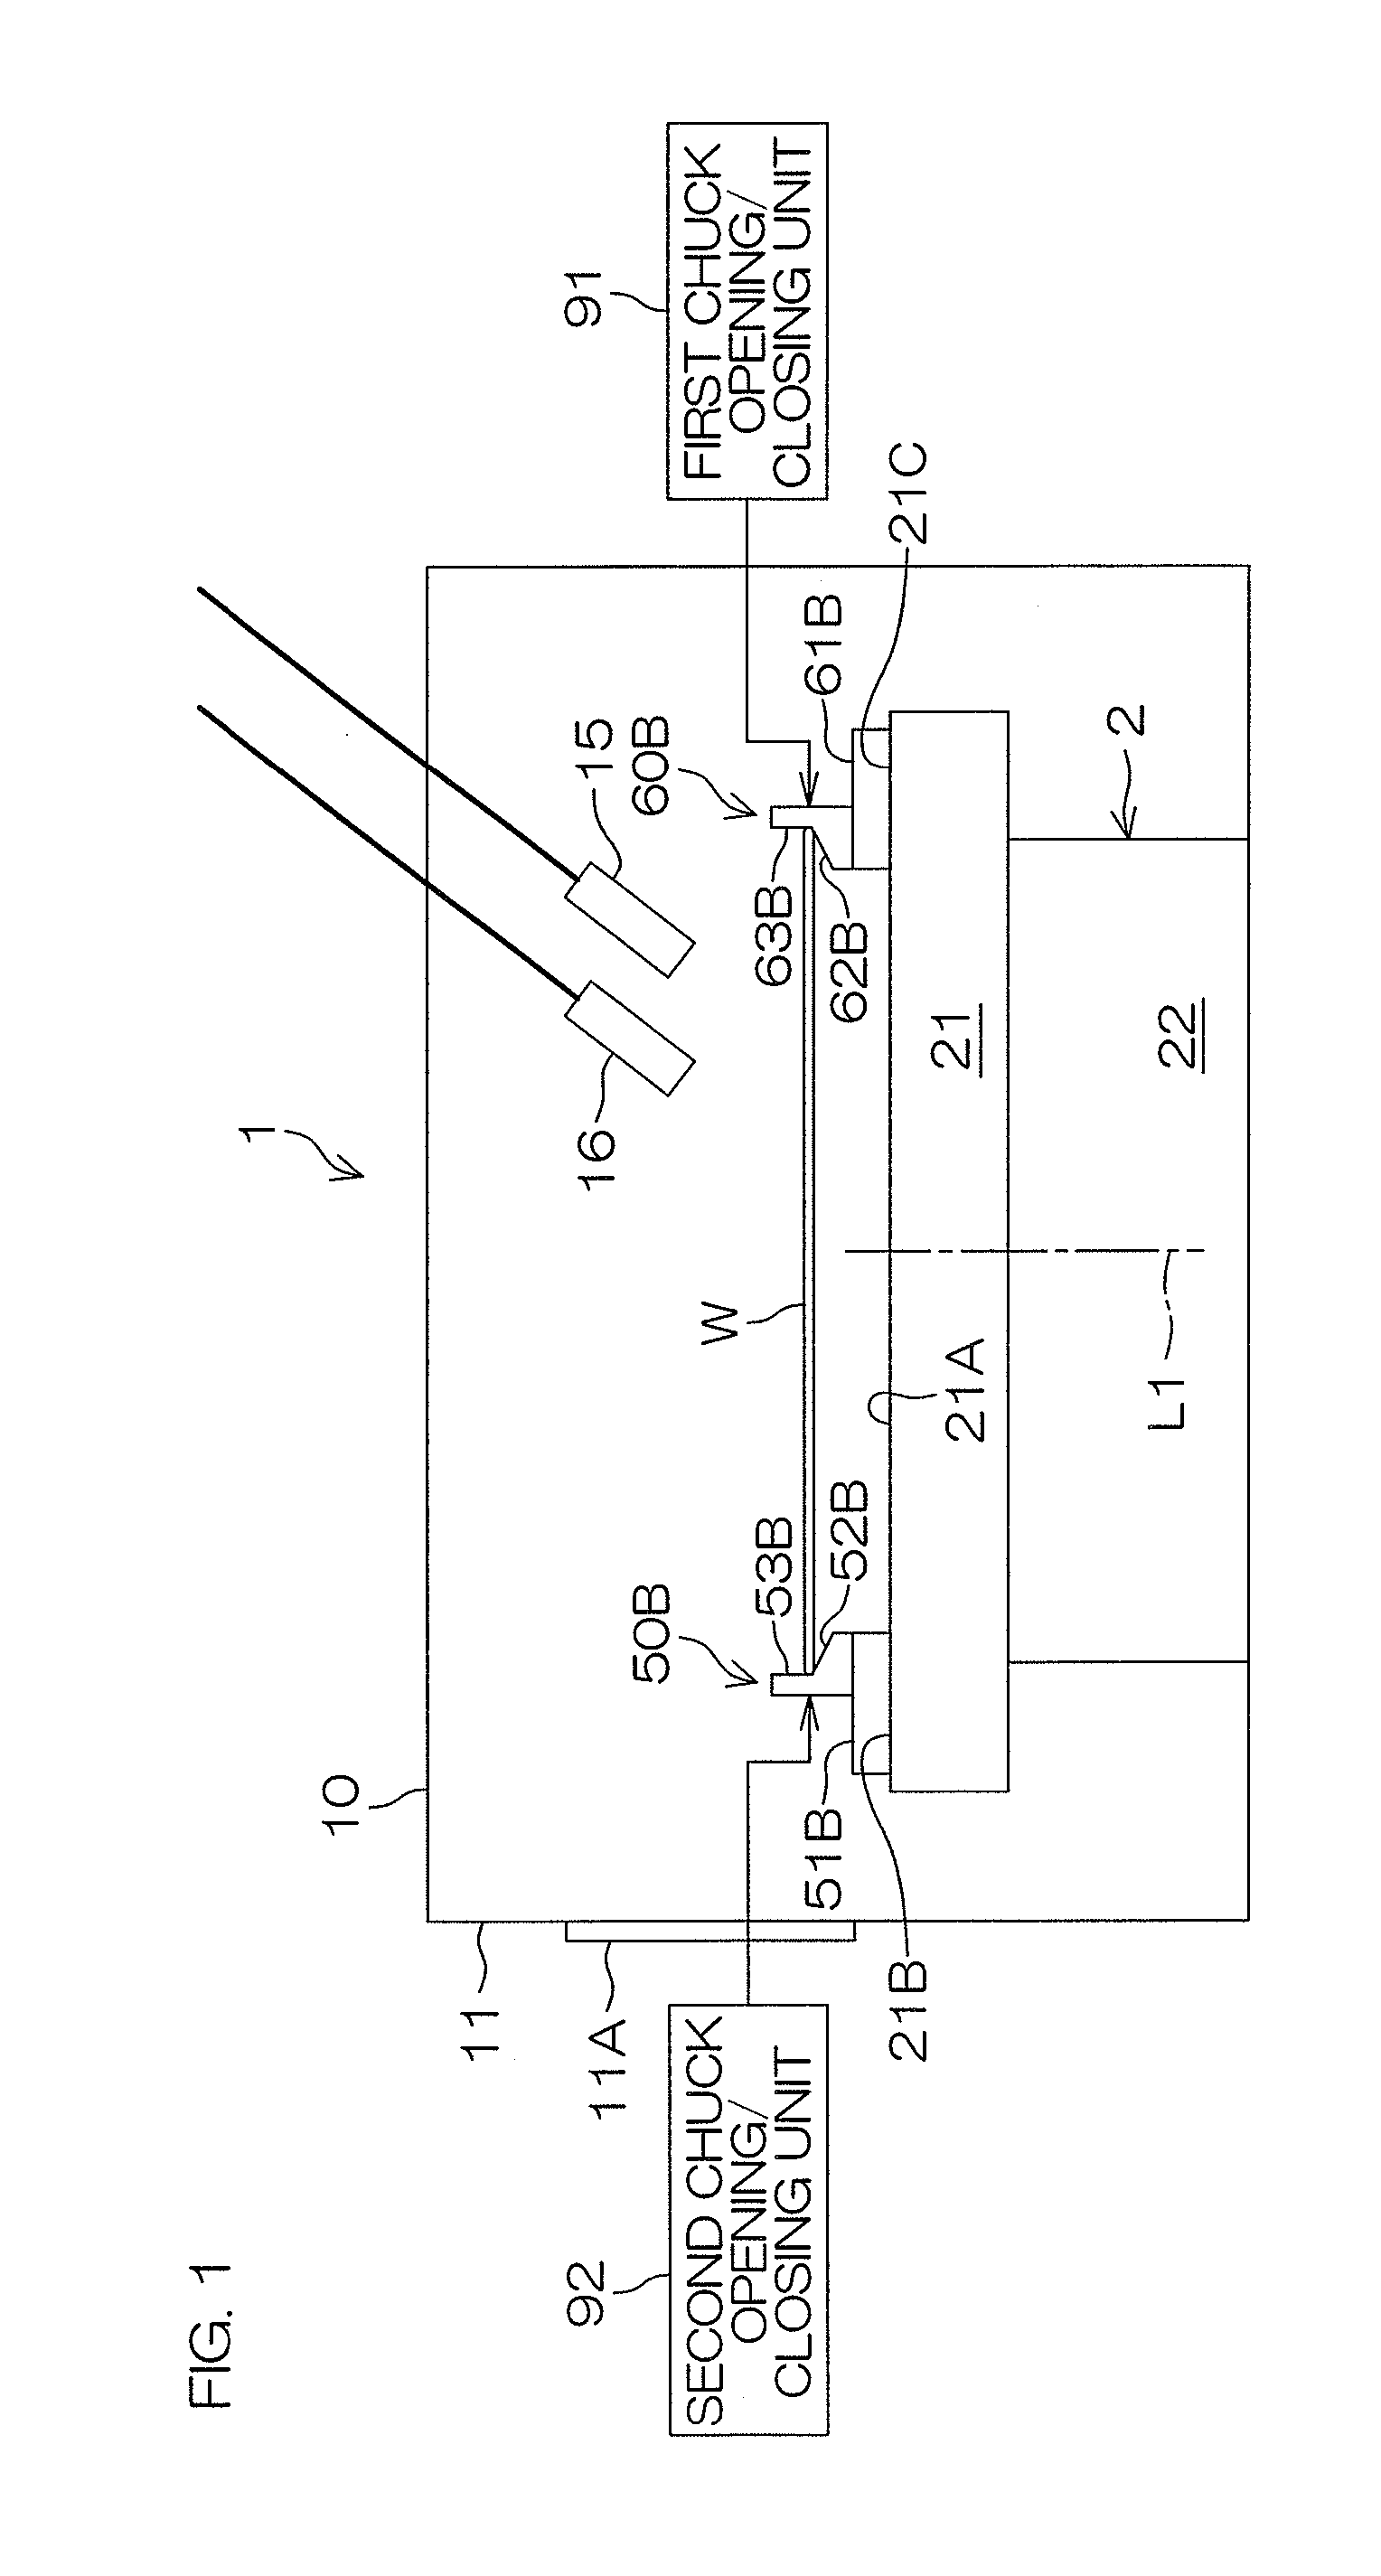 Substrate holding method and substrate processing apparatus